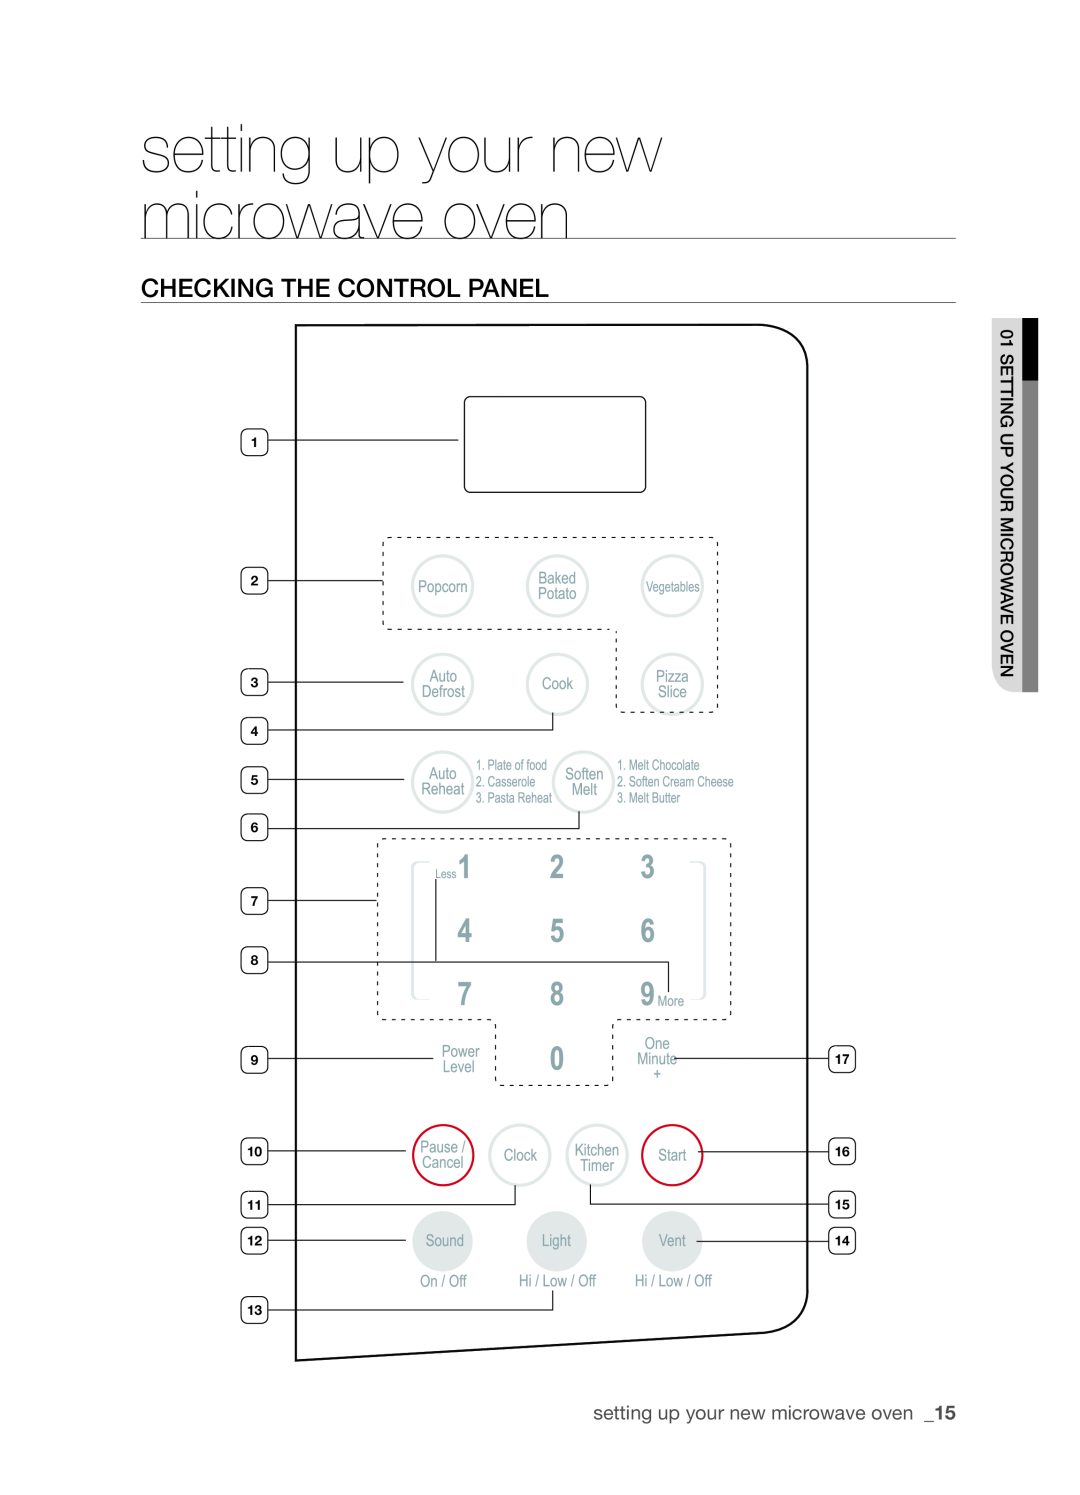 Samsung SMH9151 user manual Checking the control panel, setting up your new microwave oven 